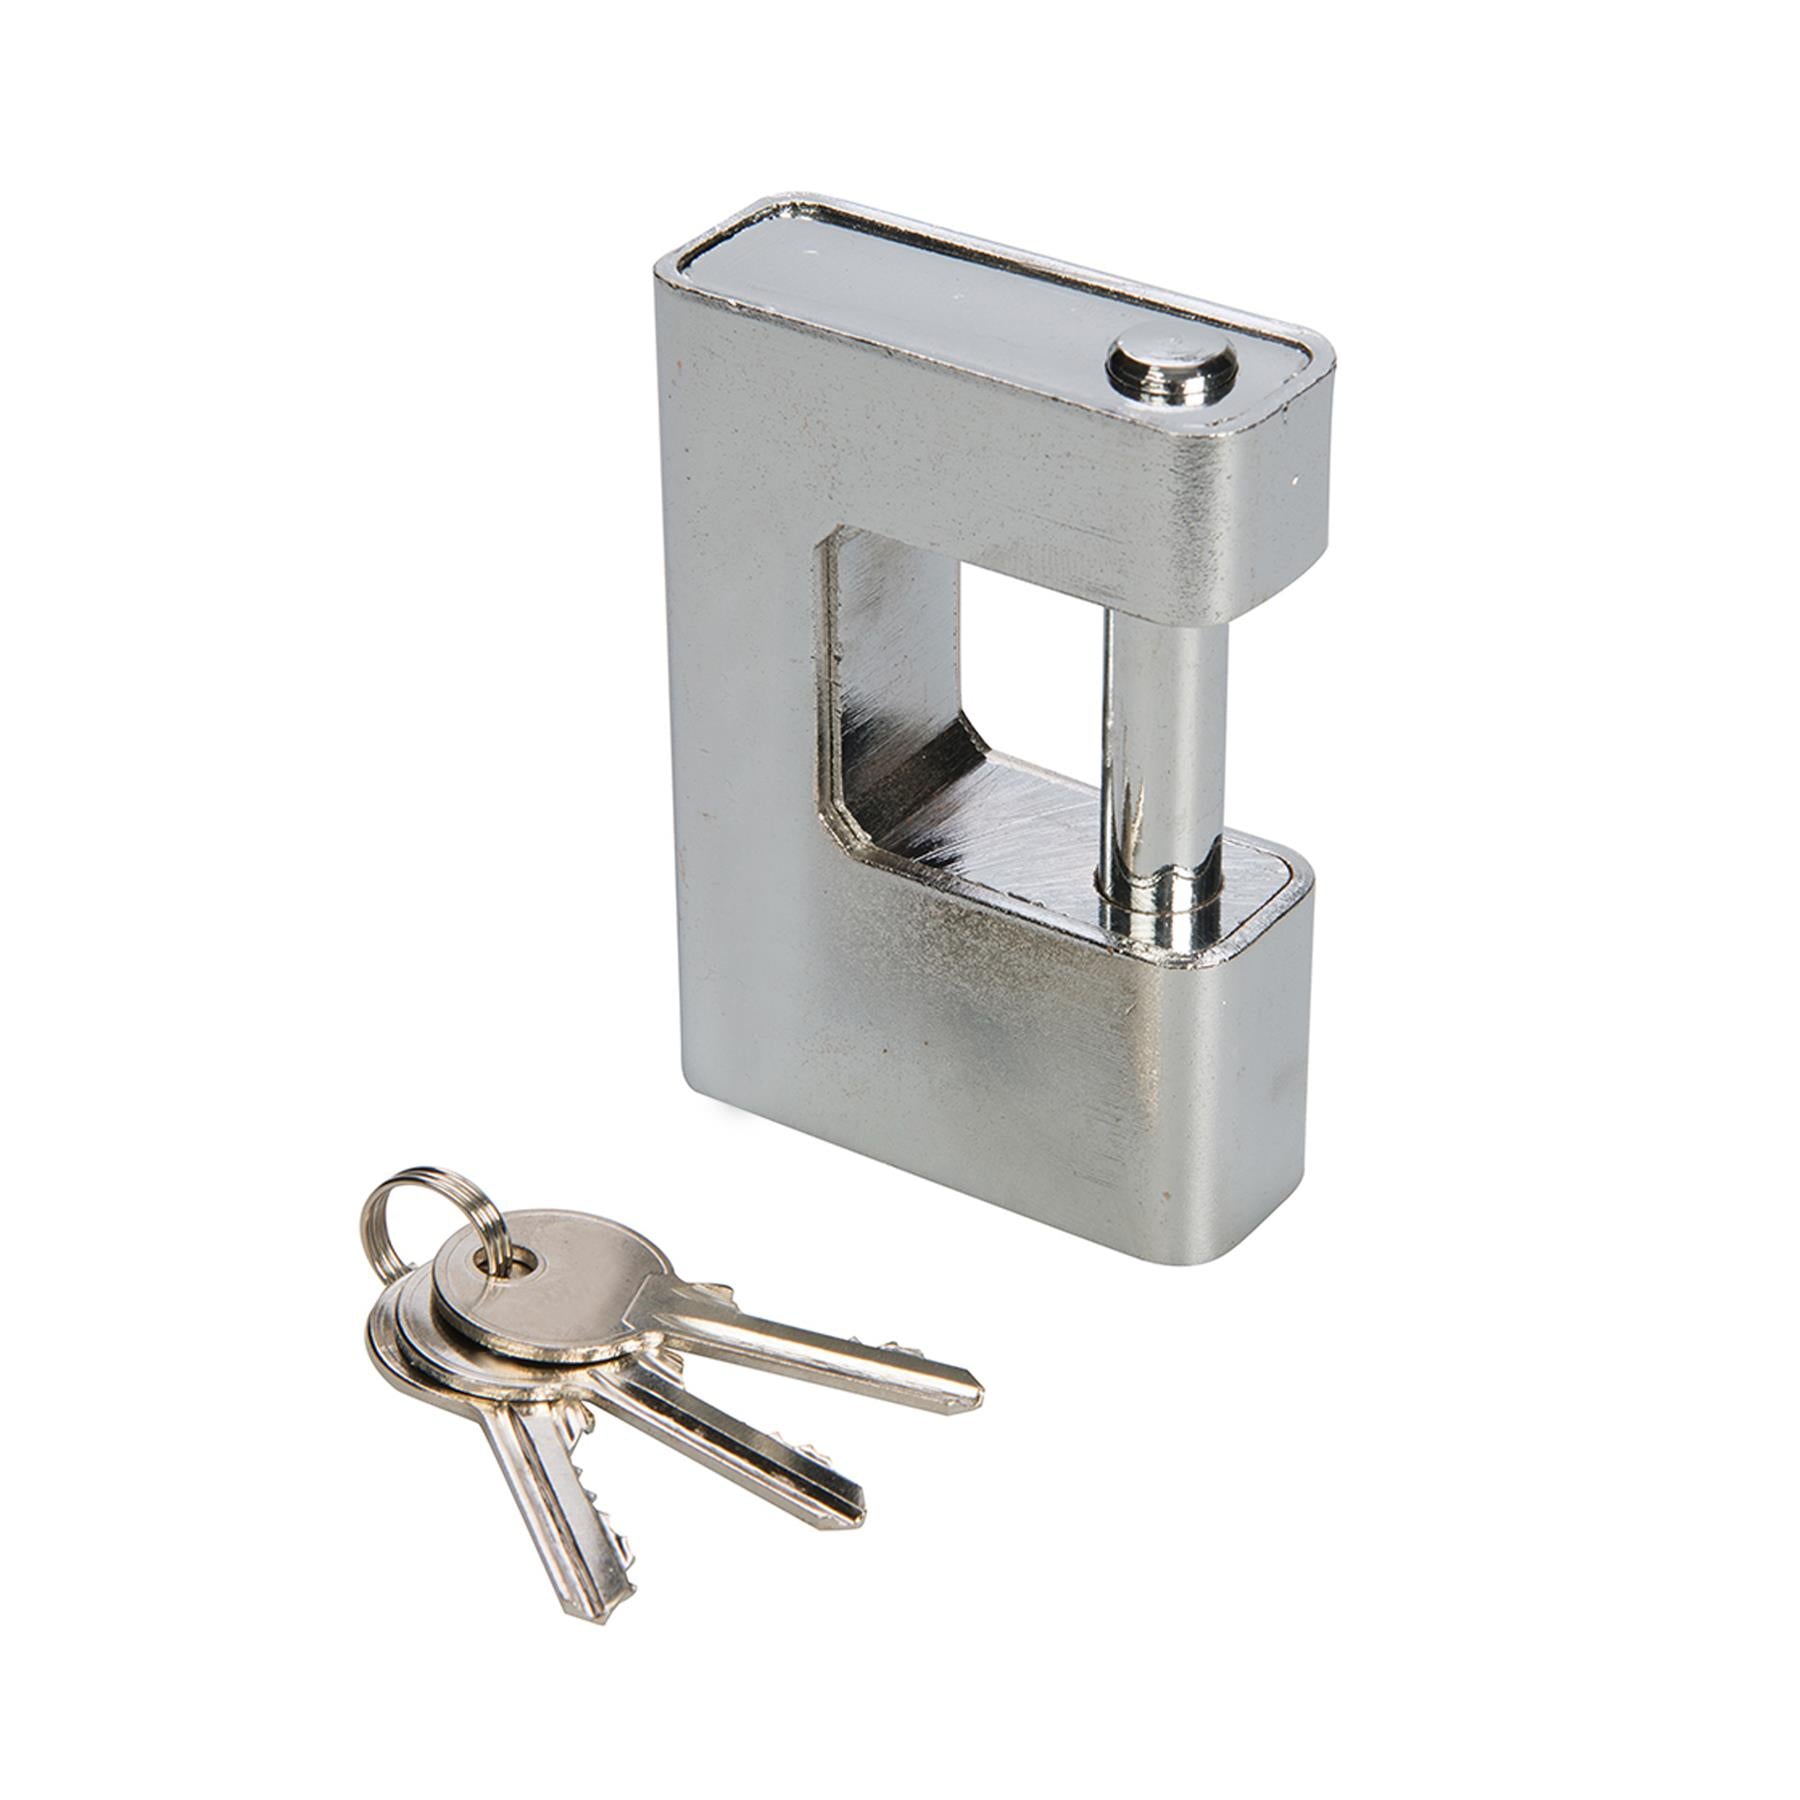 Heavy Duty Close Armoured Shutter Lock Padlock 90mm - Security & Safety